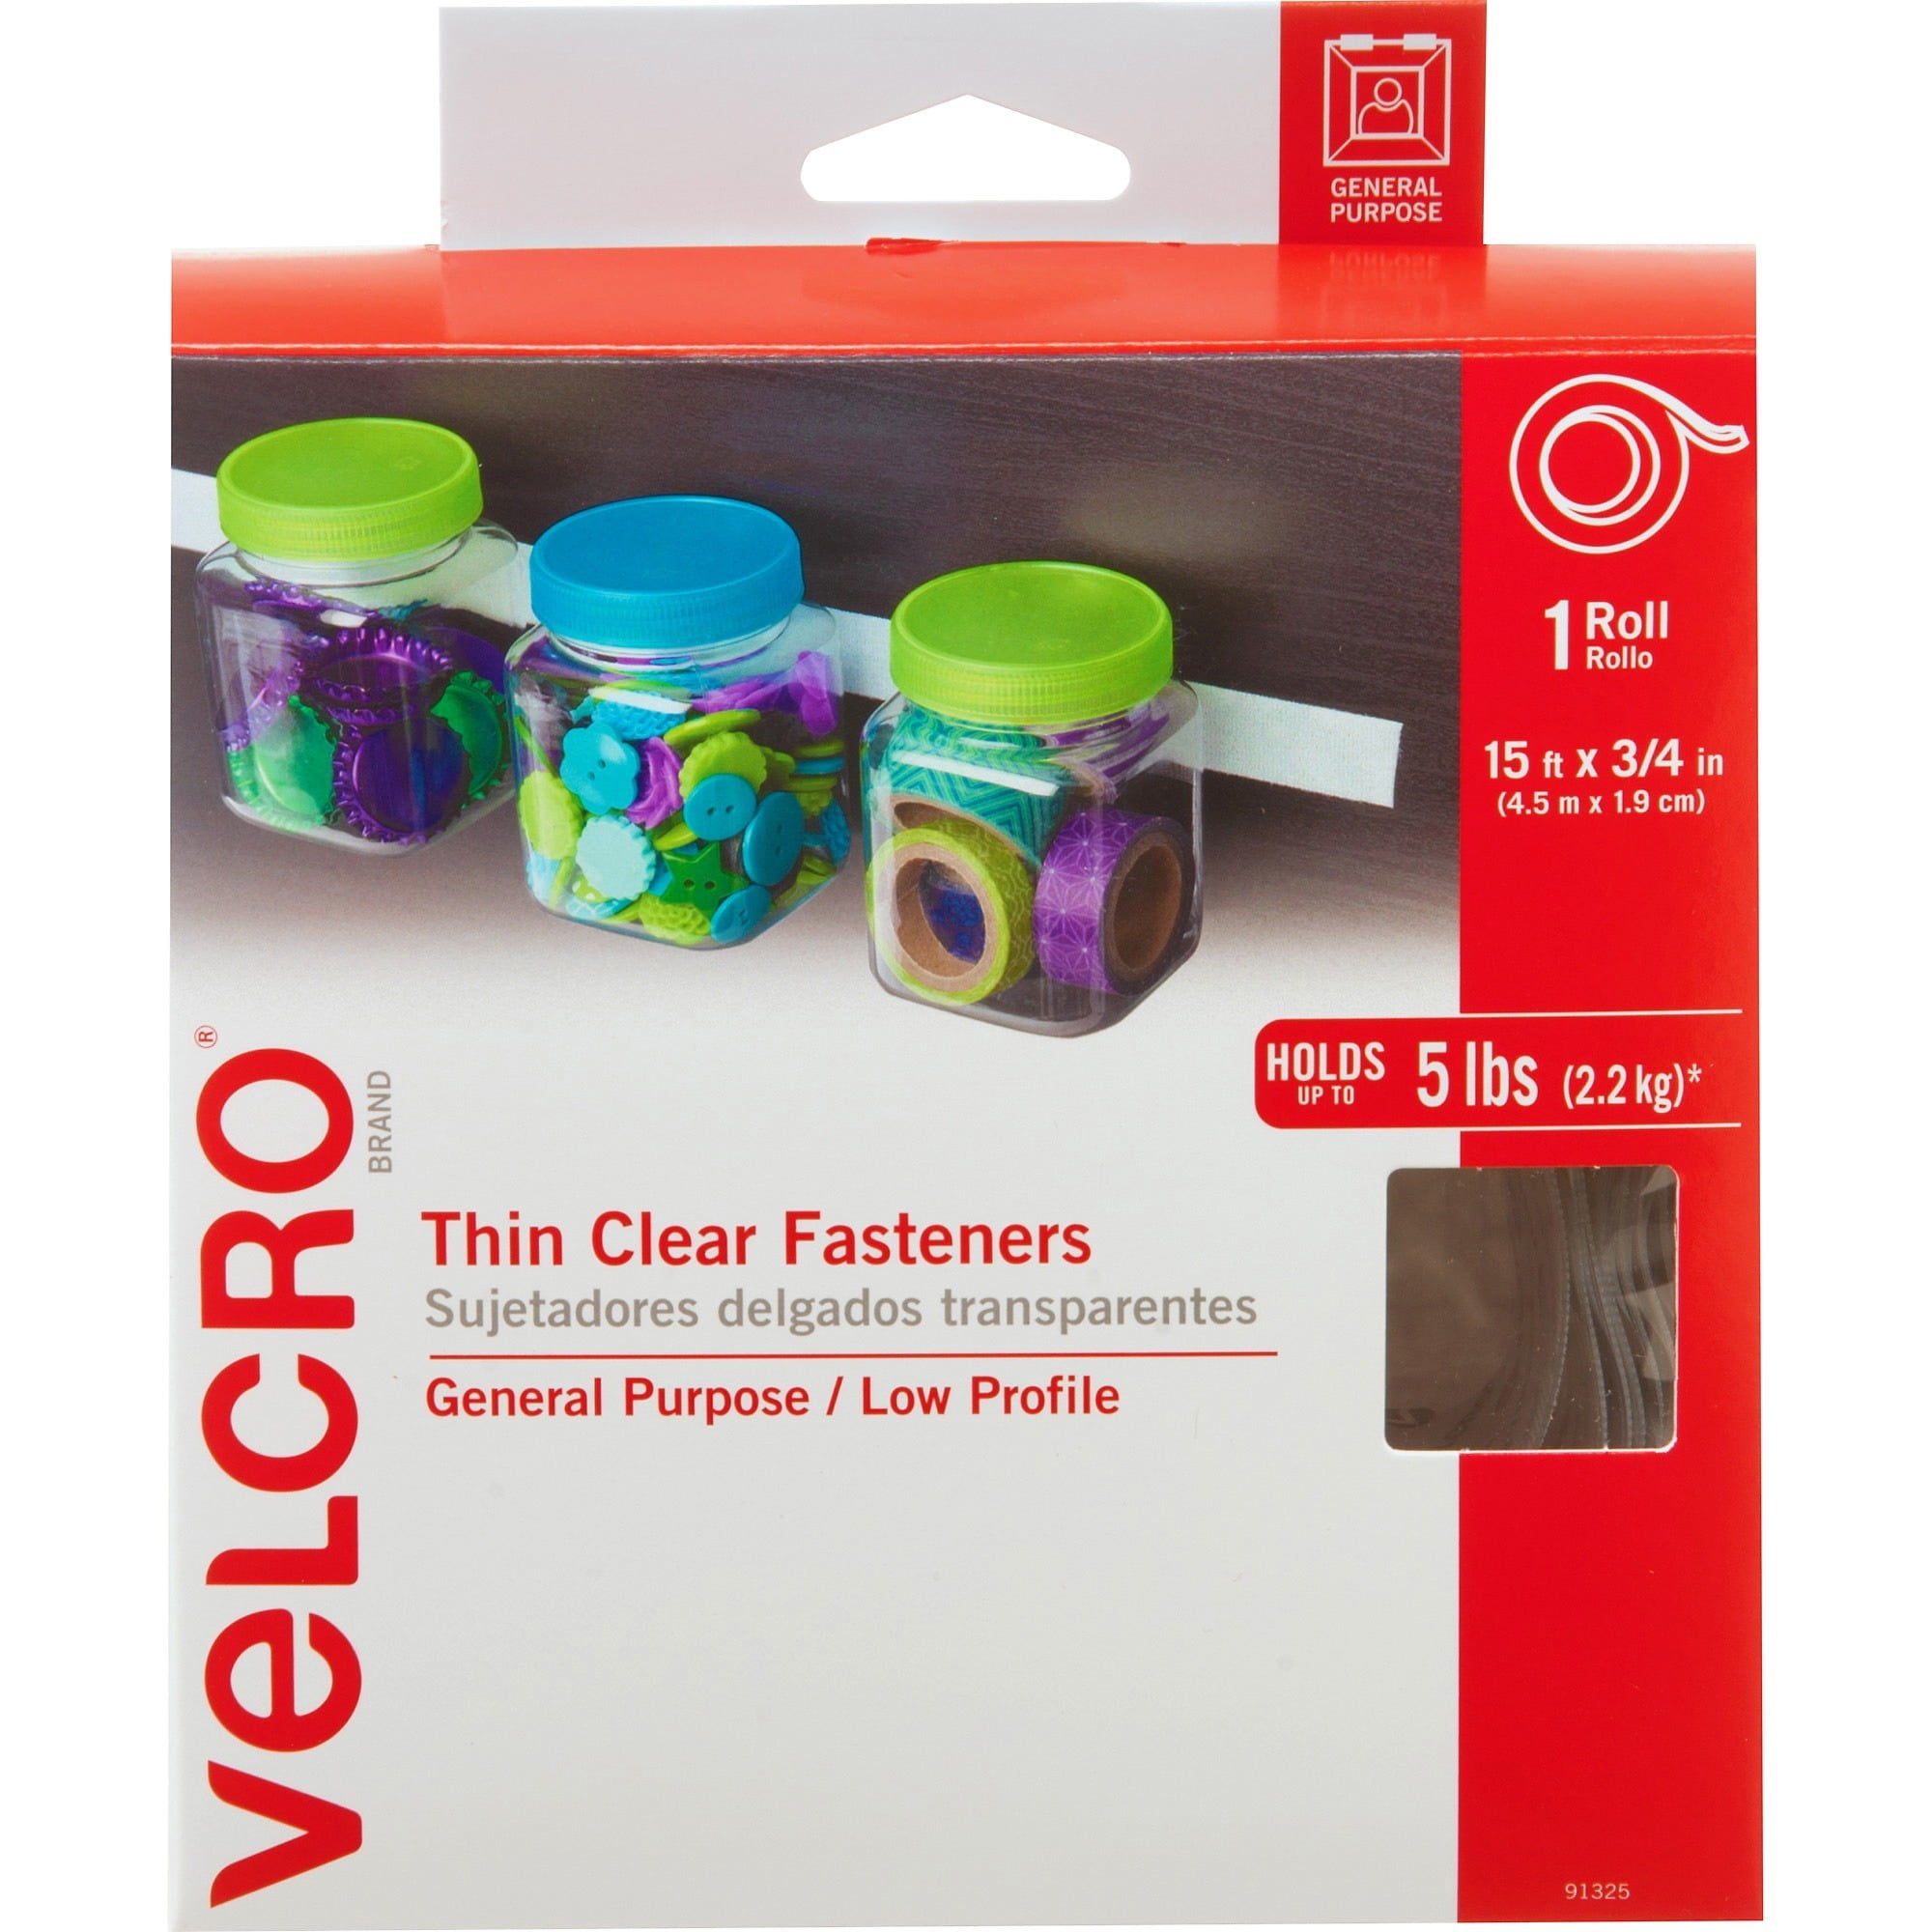 VELCRO Brand - Thin Clear Fasteners, General Purpose/ Low Profile